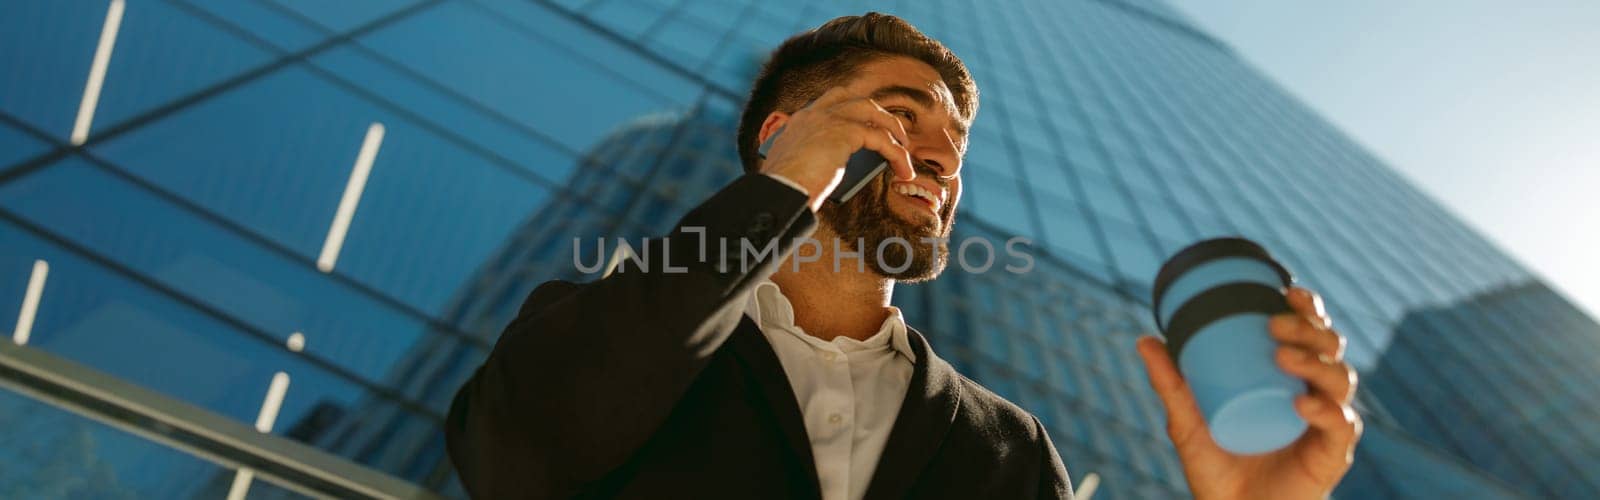 Handsome businessman is talking phone and drinking coffee standing on background of city skyscrapers by Yaroslav_astakhov